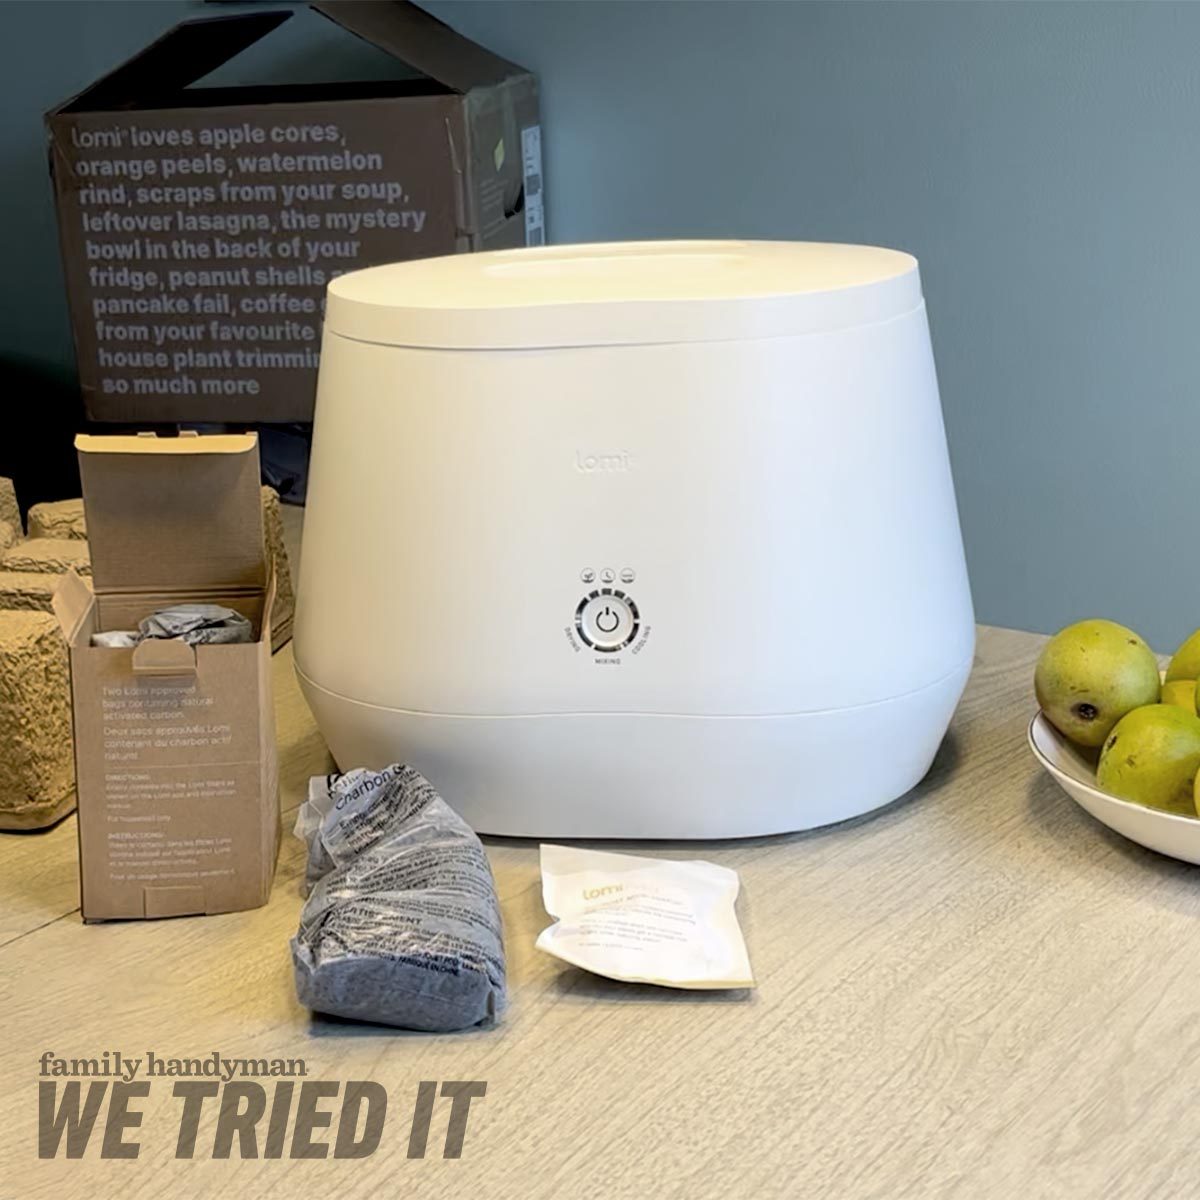 Kitchen Composter Turns Food into Fertilizer in 24 Hours or Less